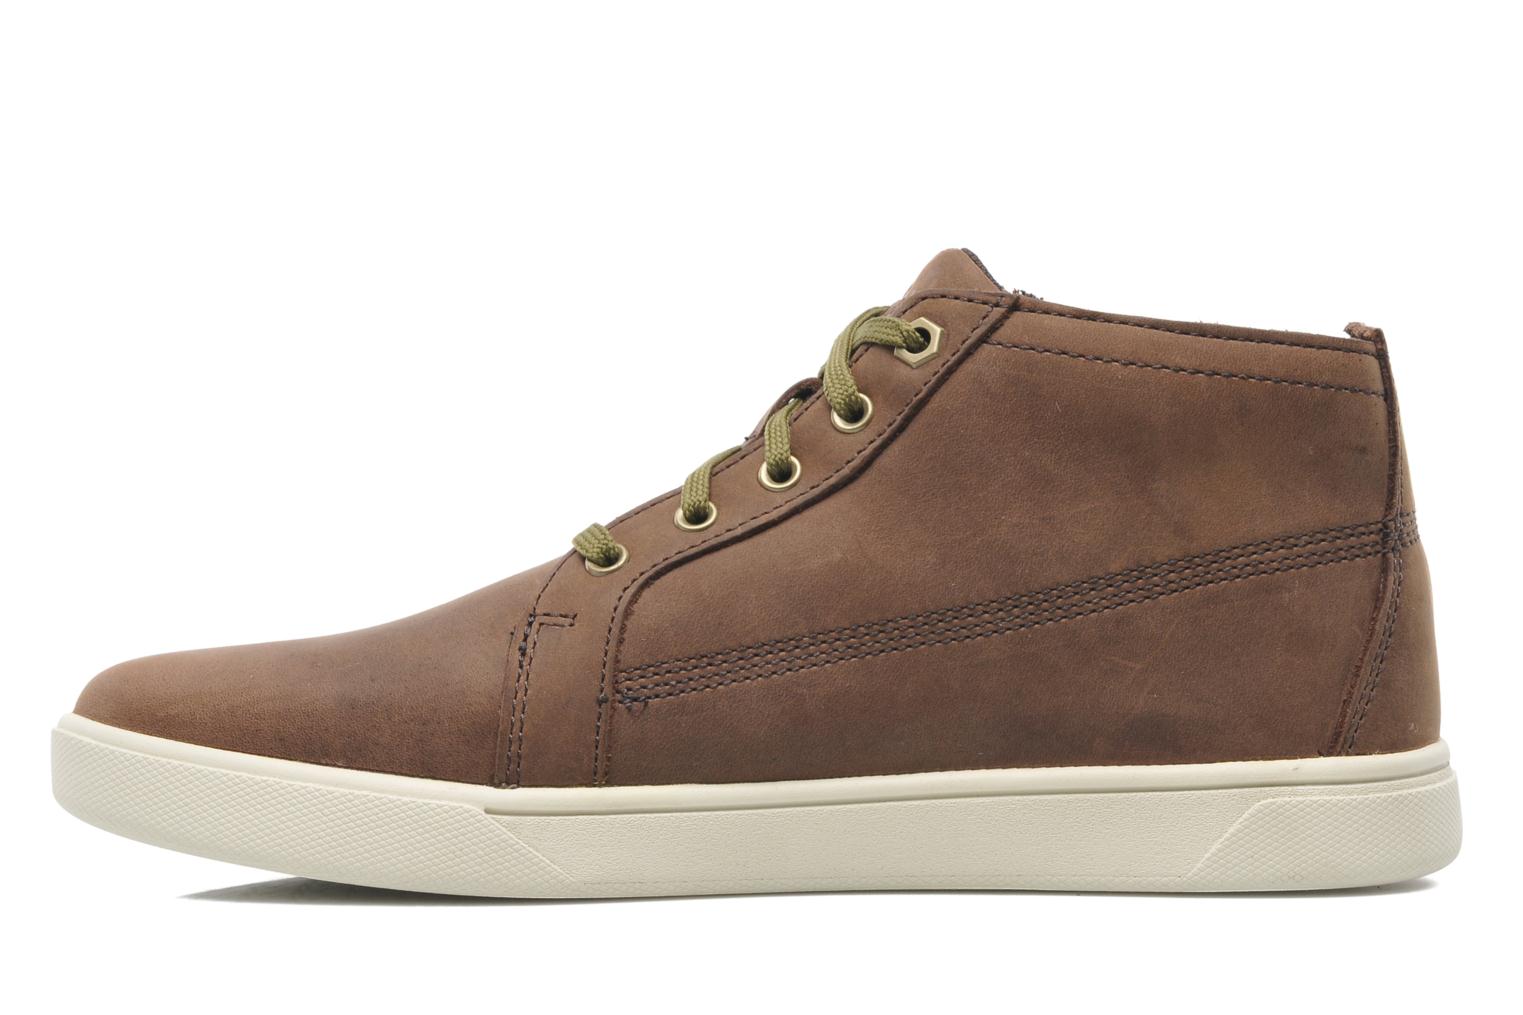 Timberland Groveton Leather Chukka Lace-up shoes in Brown at Sarenza.co ...